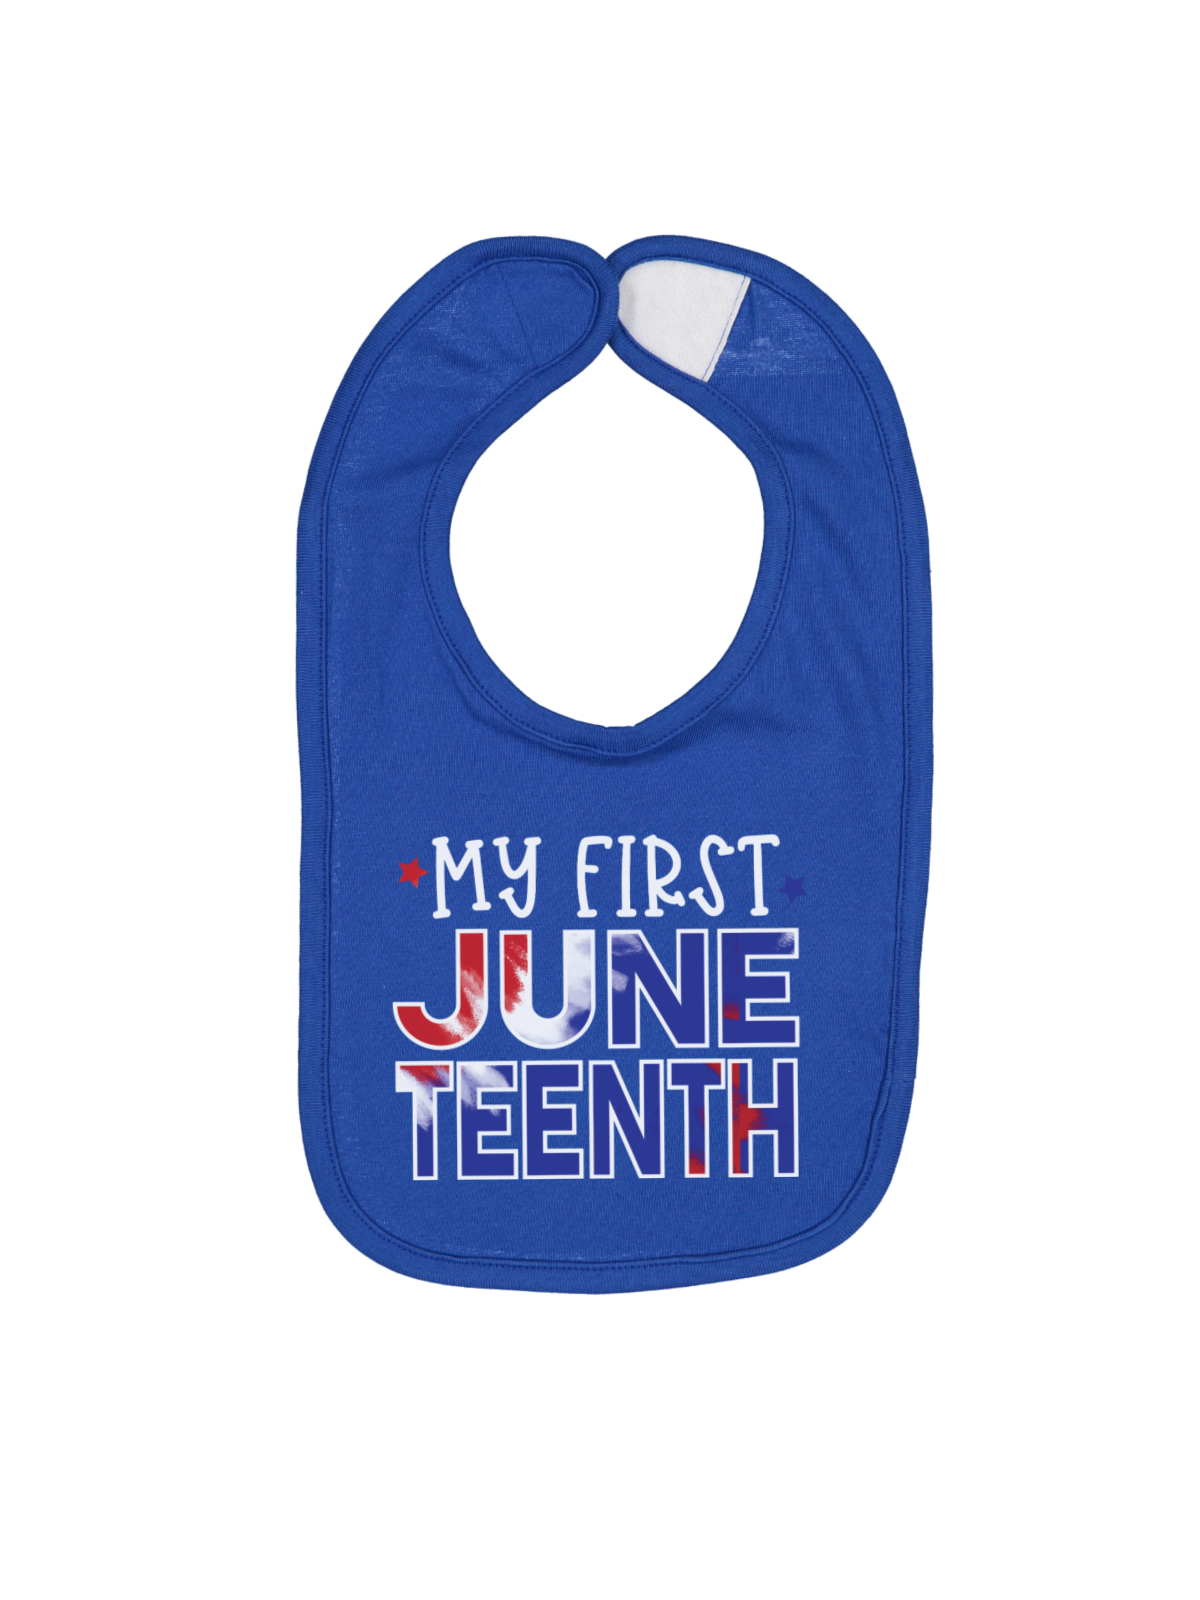 My First Juneteenth Infant Bib in Royal Blue